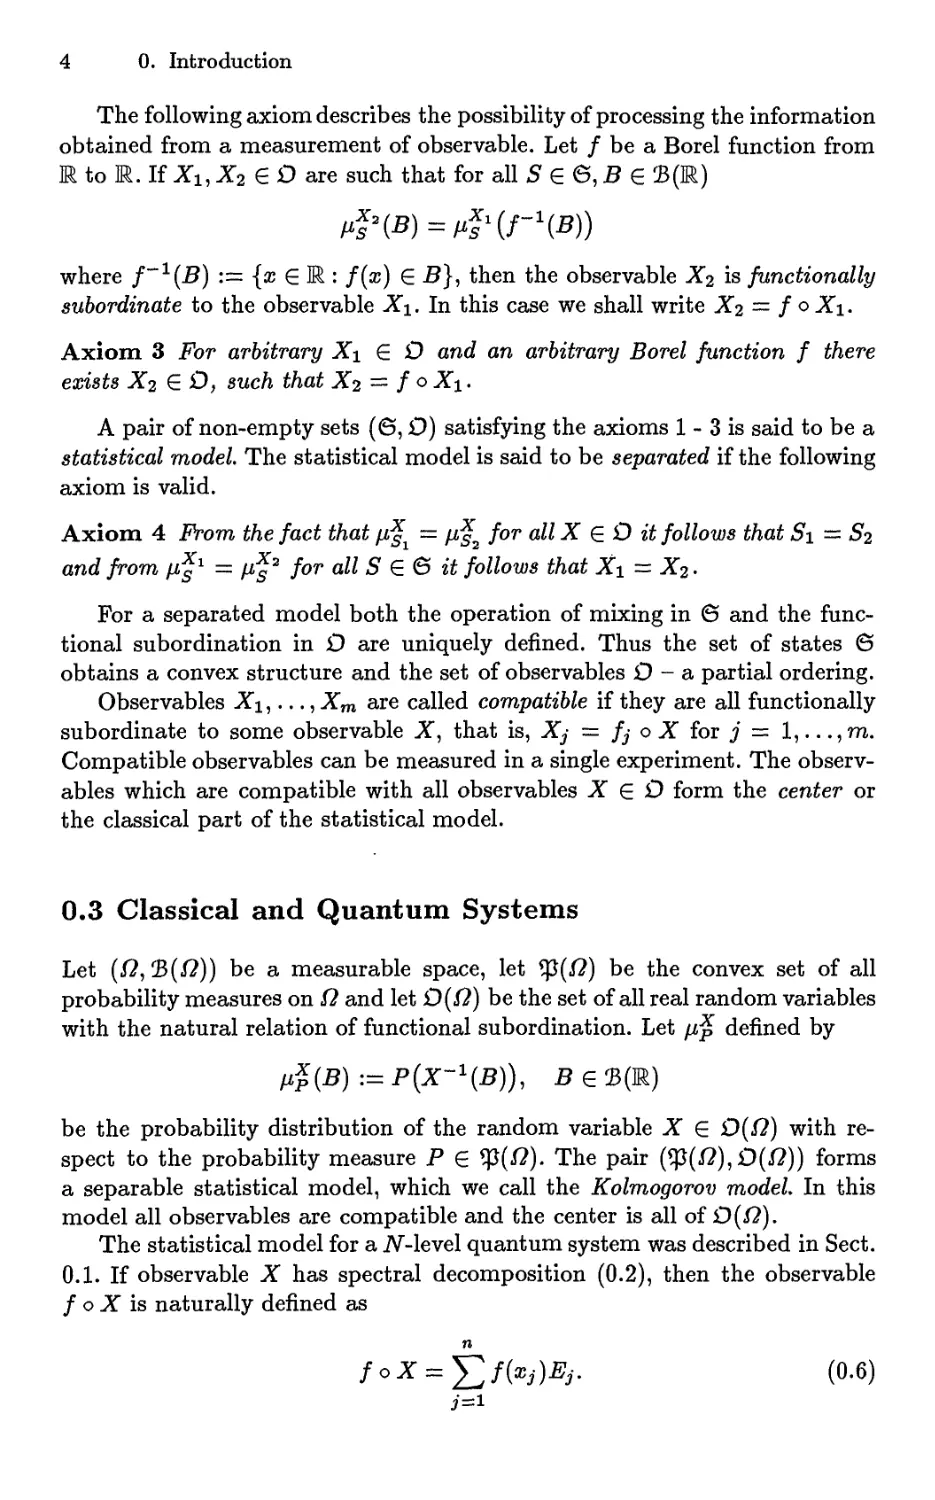 0.3 Classical and Quantum Systems